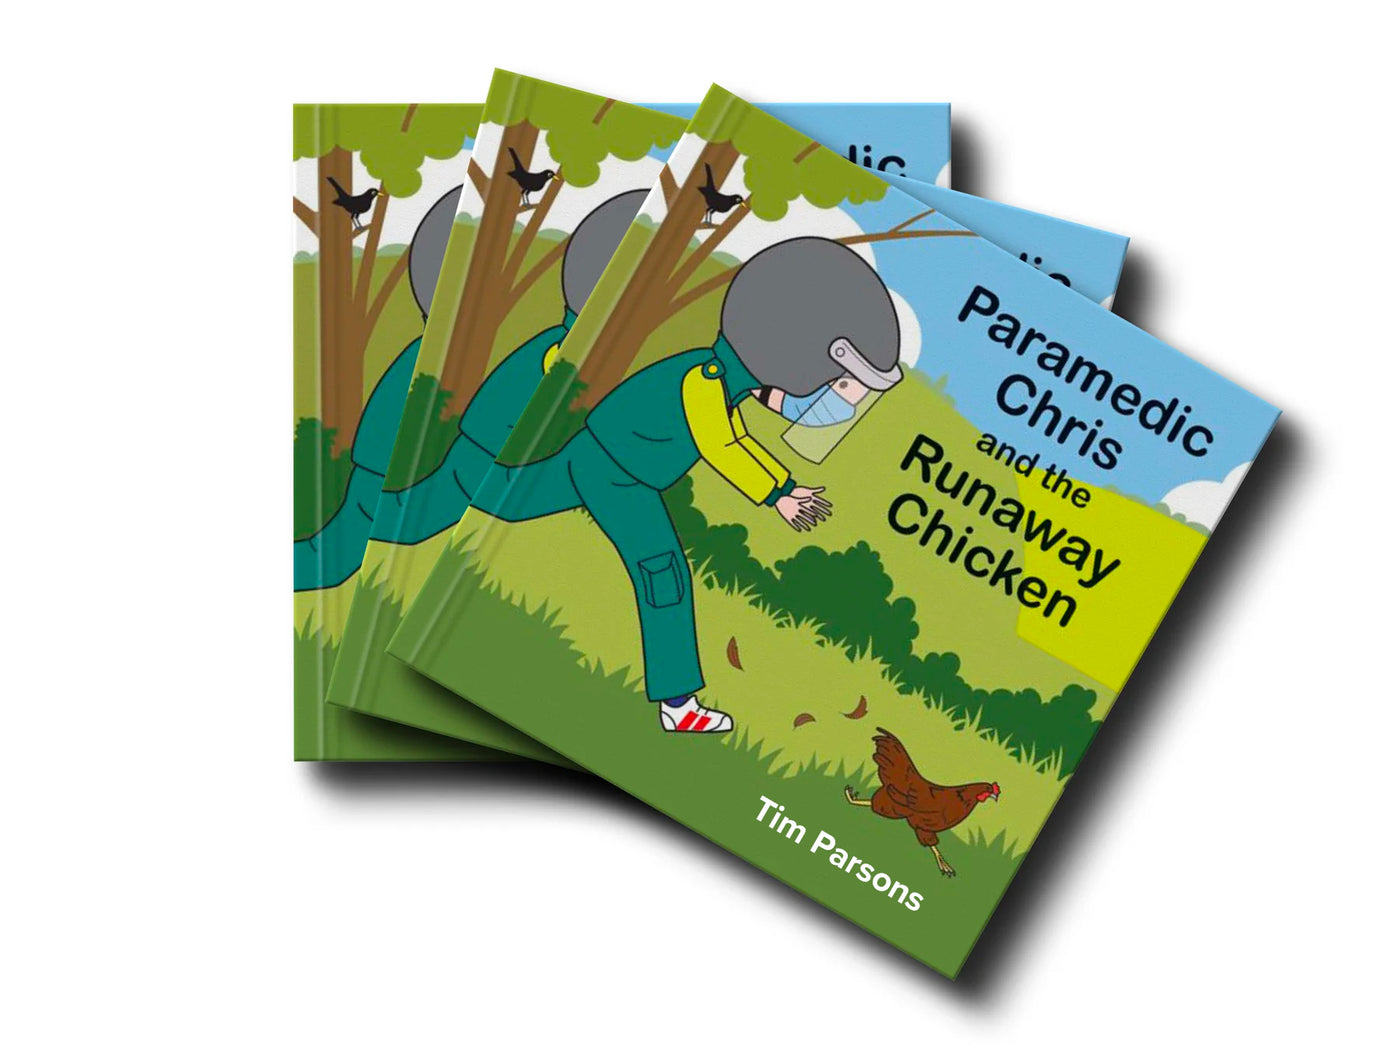 Paramedic Chris and the Runaway Chicken - Paperback